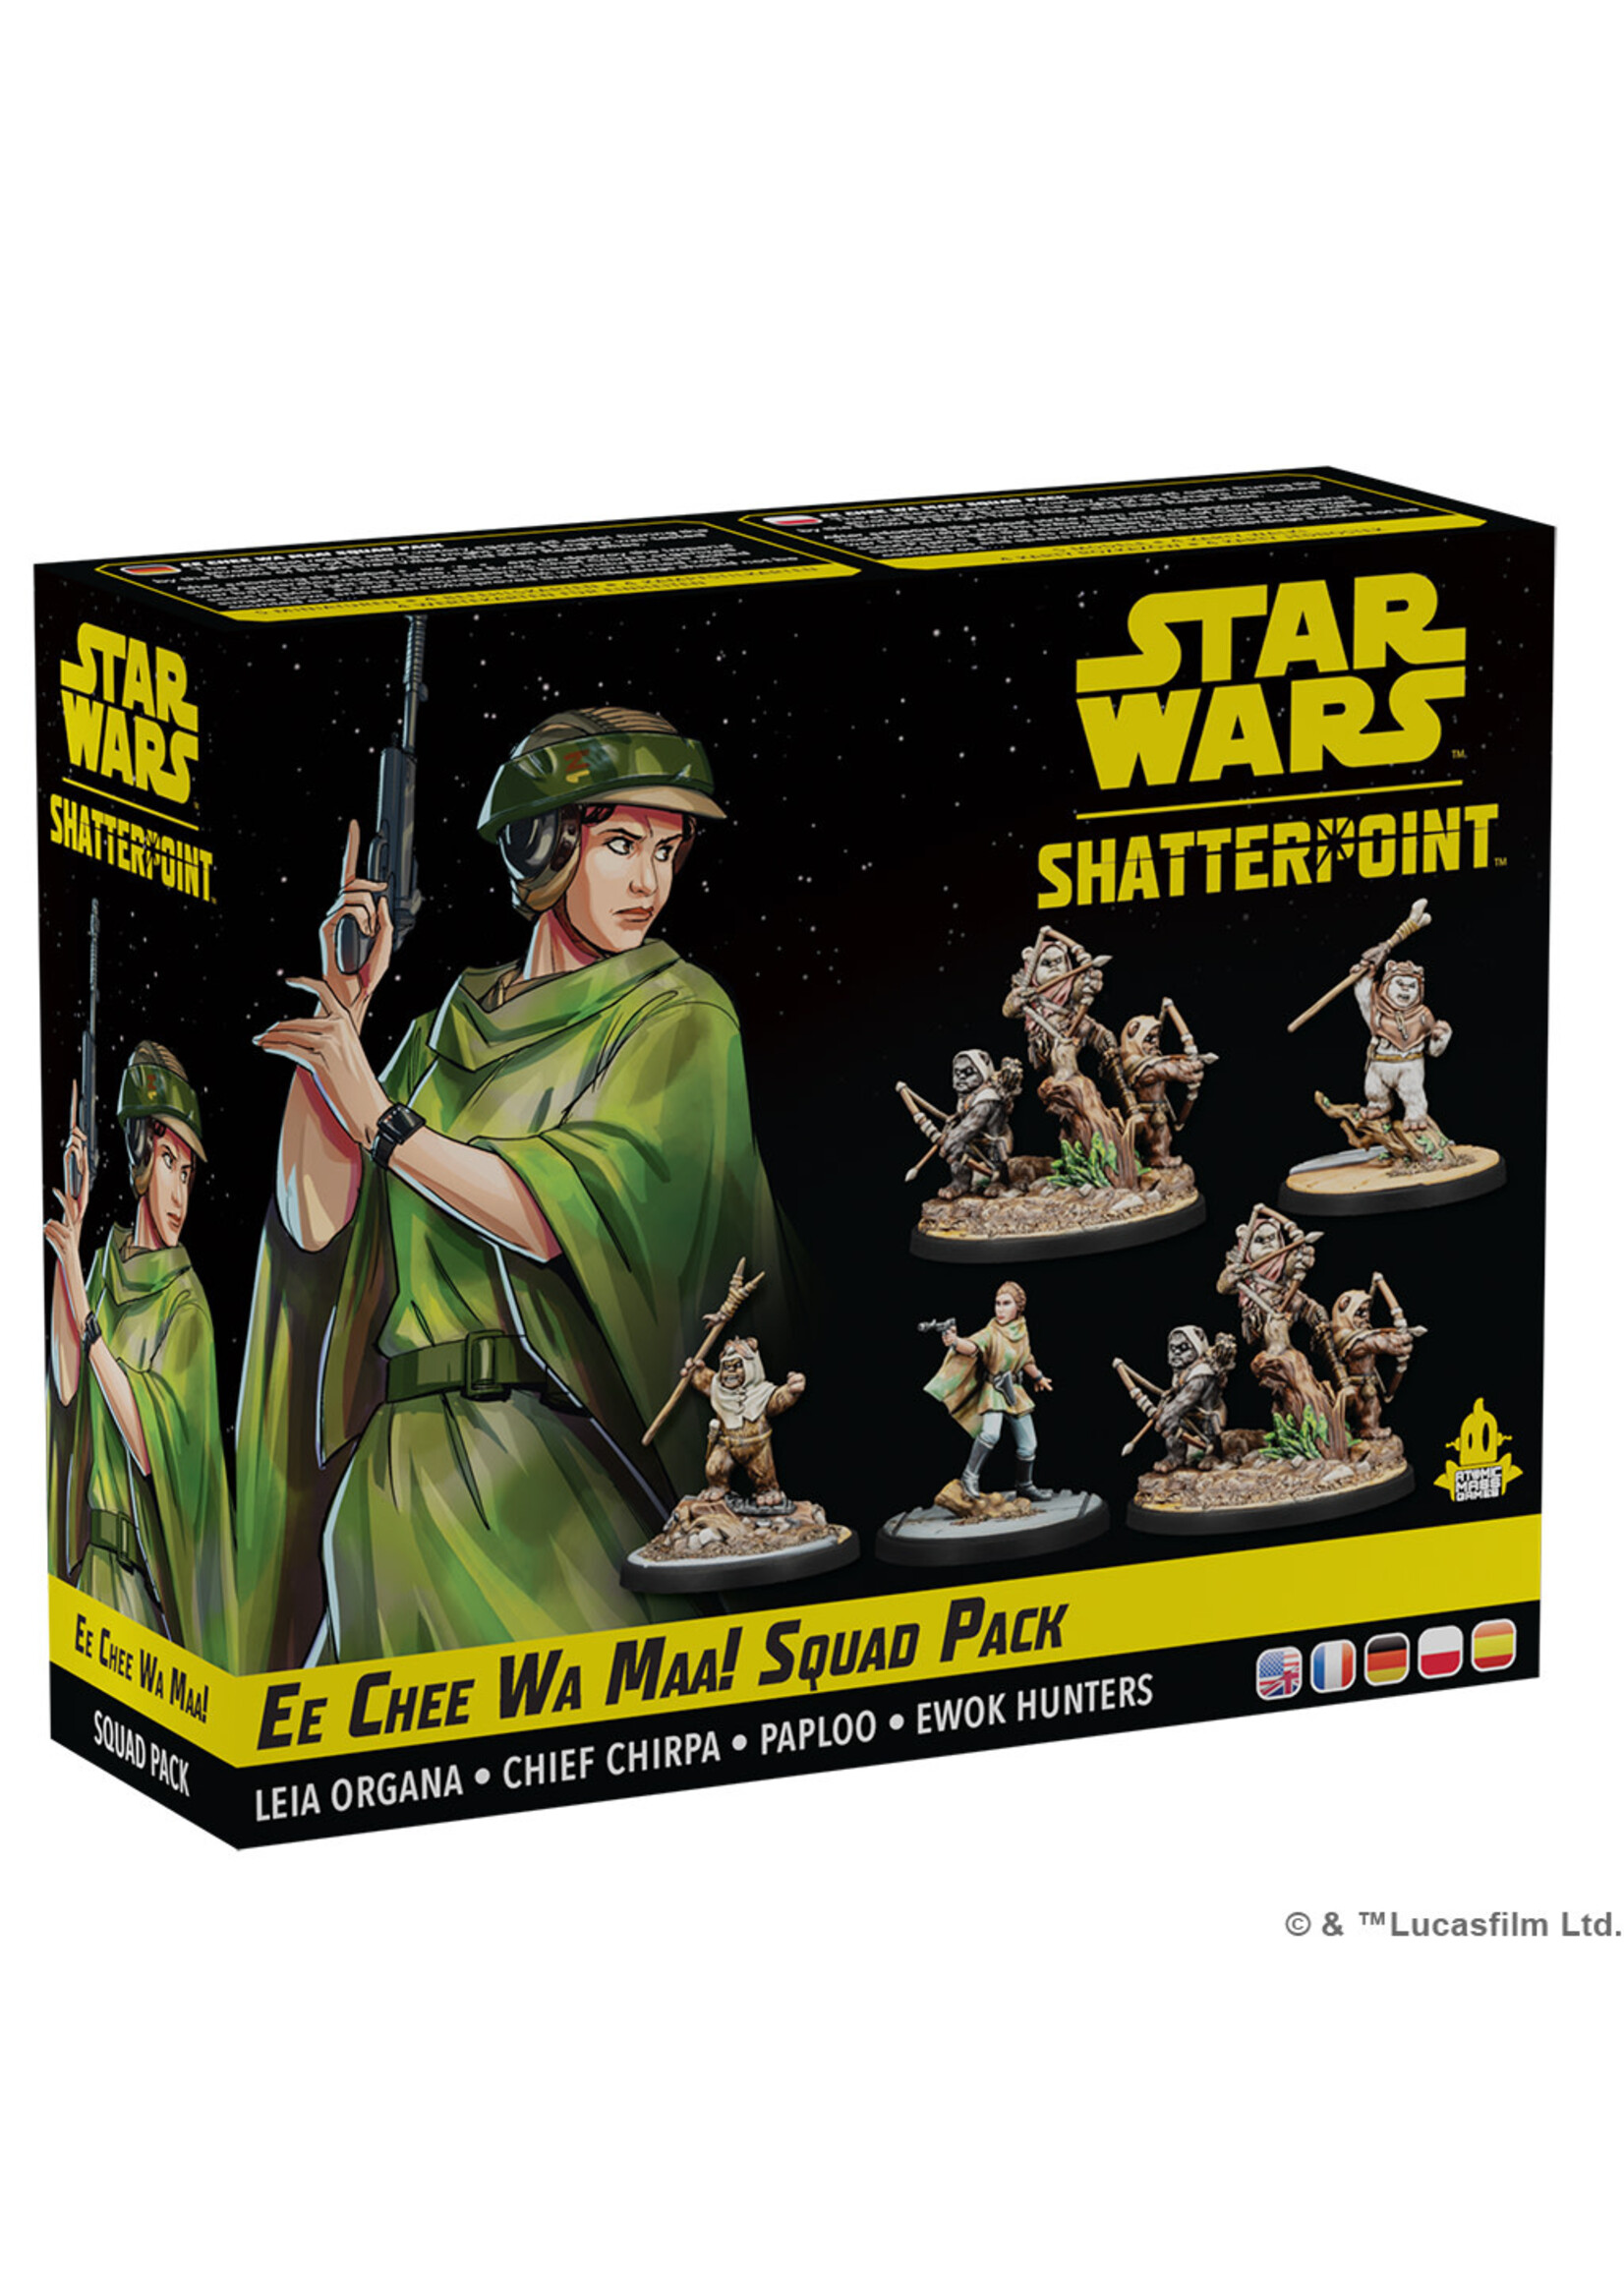 Atomic Mass Games Star Wars: Shatterpoint – Ee Chee Wa Maa!Squad Pack